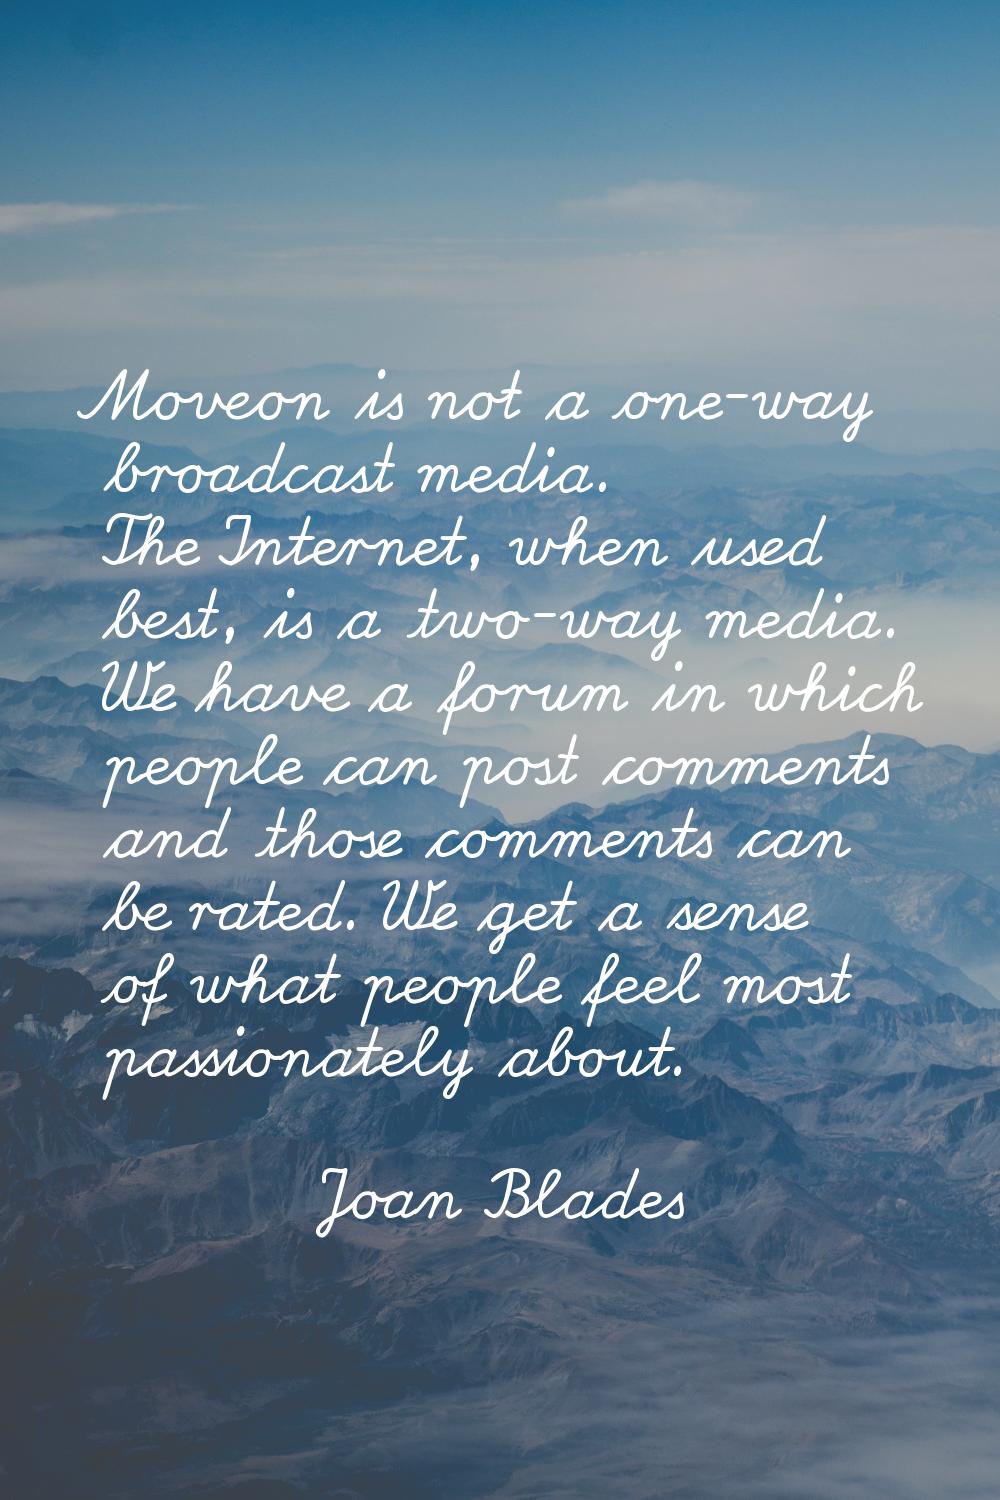 Moveon is not a one-way broadcast media. The Internet, when used best, is a two-way media. We have 